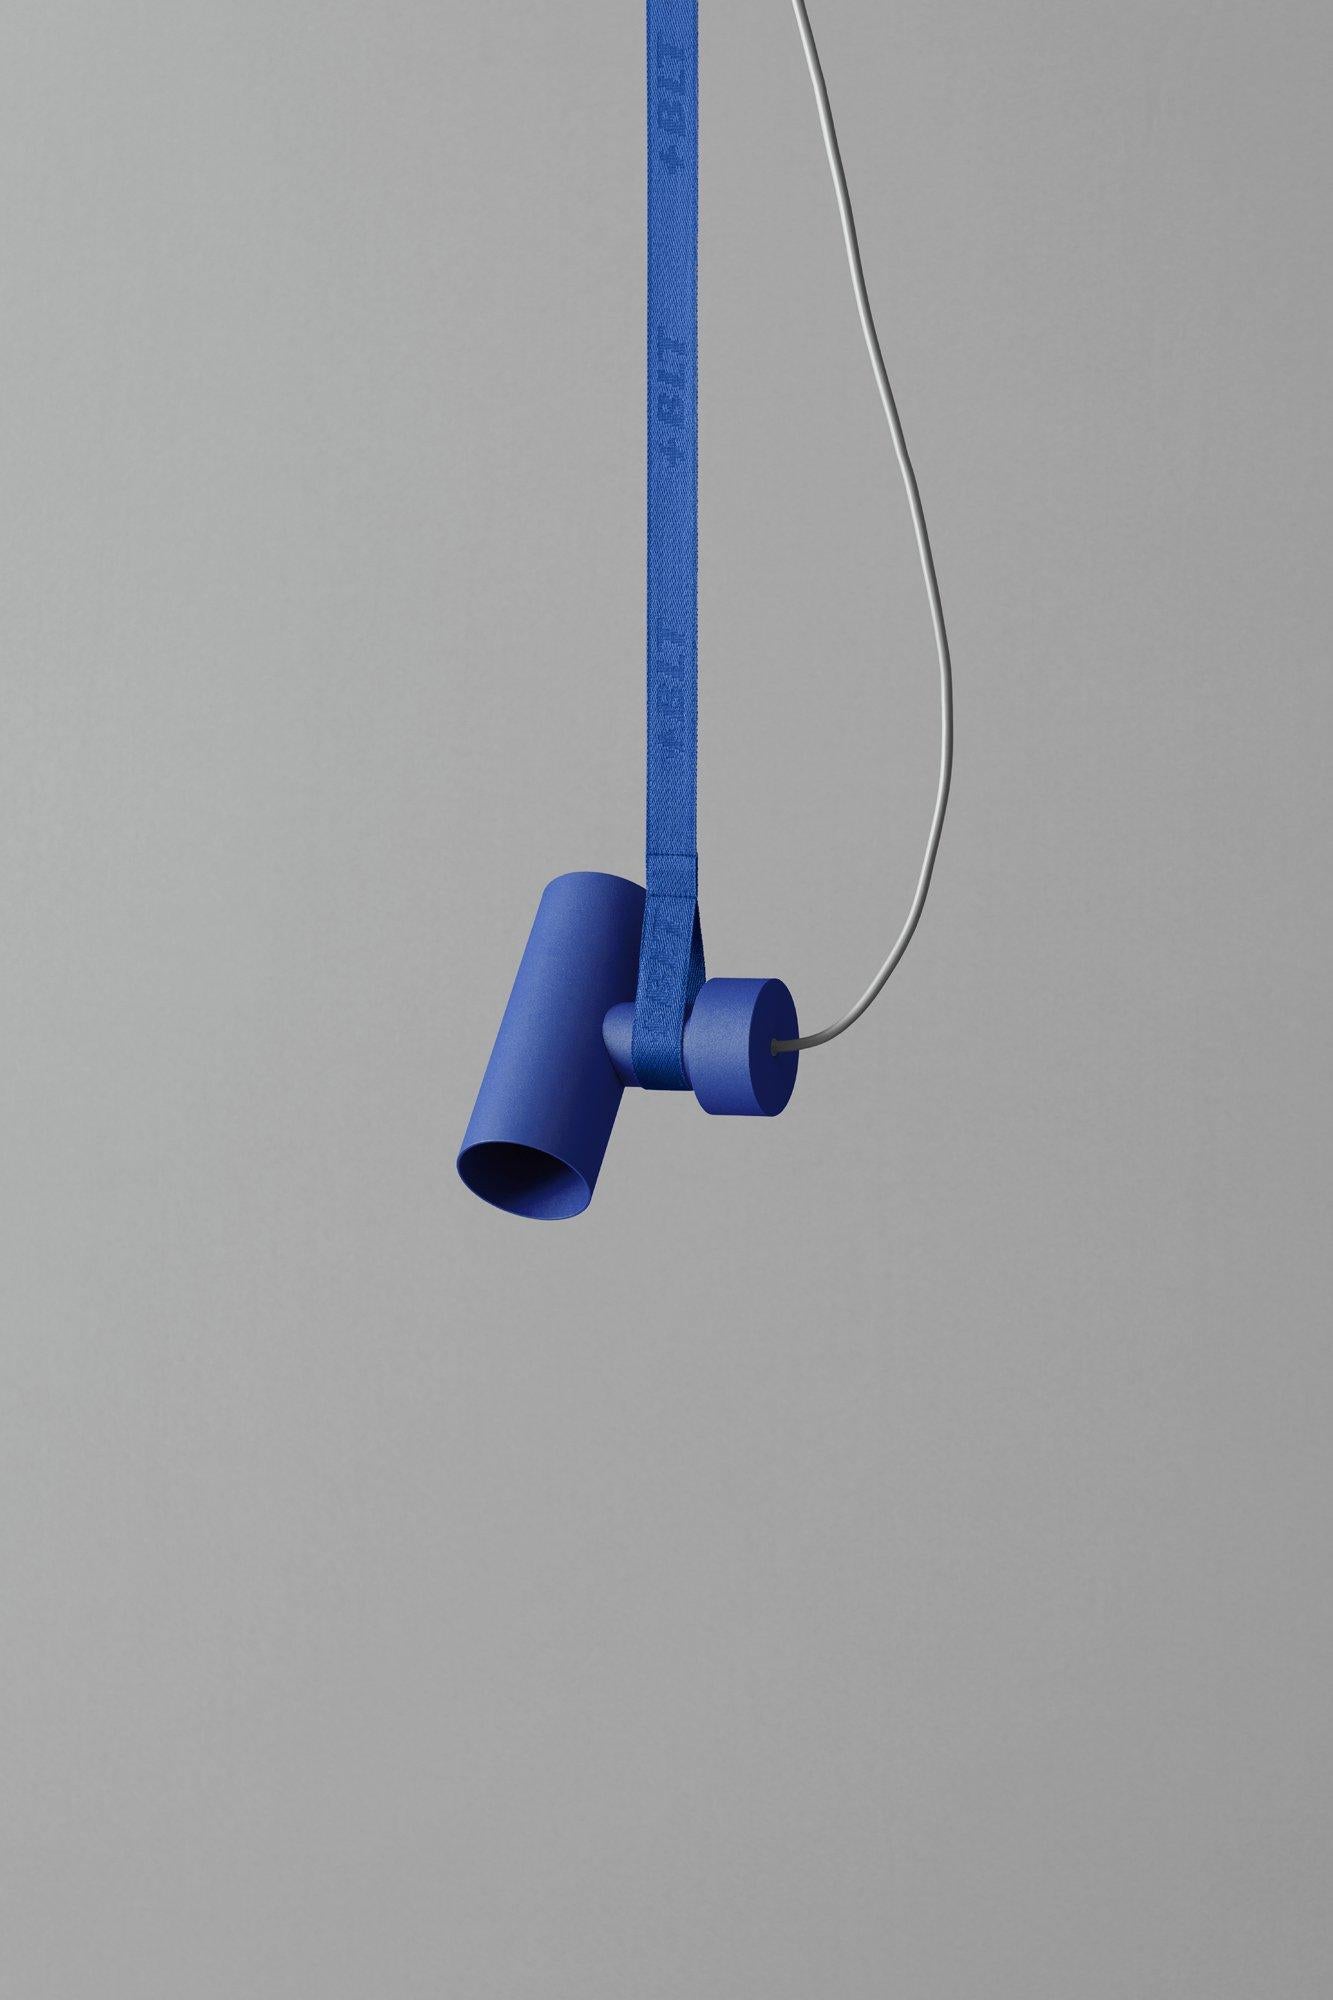 BLT_4 Ultra Blue Pendant Lamp by +kouple
Dimensions: D 6,3 x W 13,4 x H 15,5 cm. 
Materials: Powder-coated steel and textile.

Available in different color options. The rod length is 250 cm. Please contact us.

All our lamps can be wired according